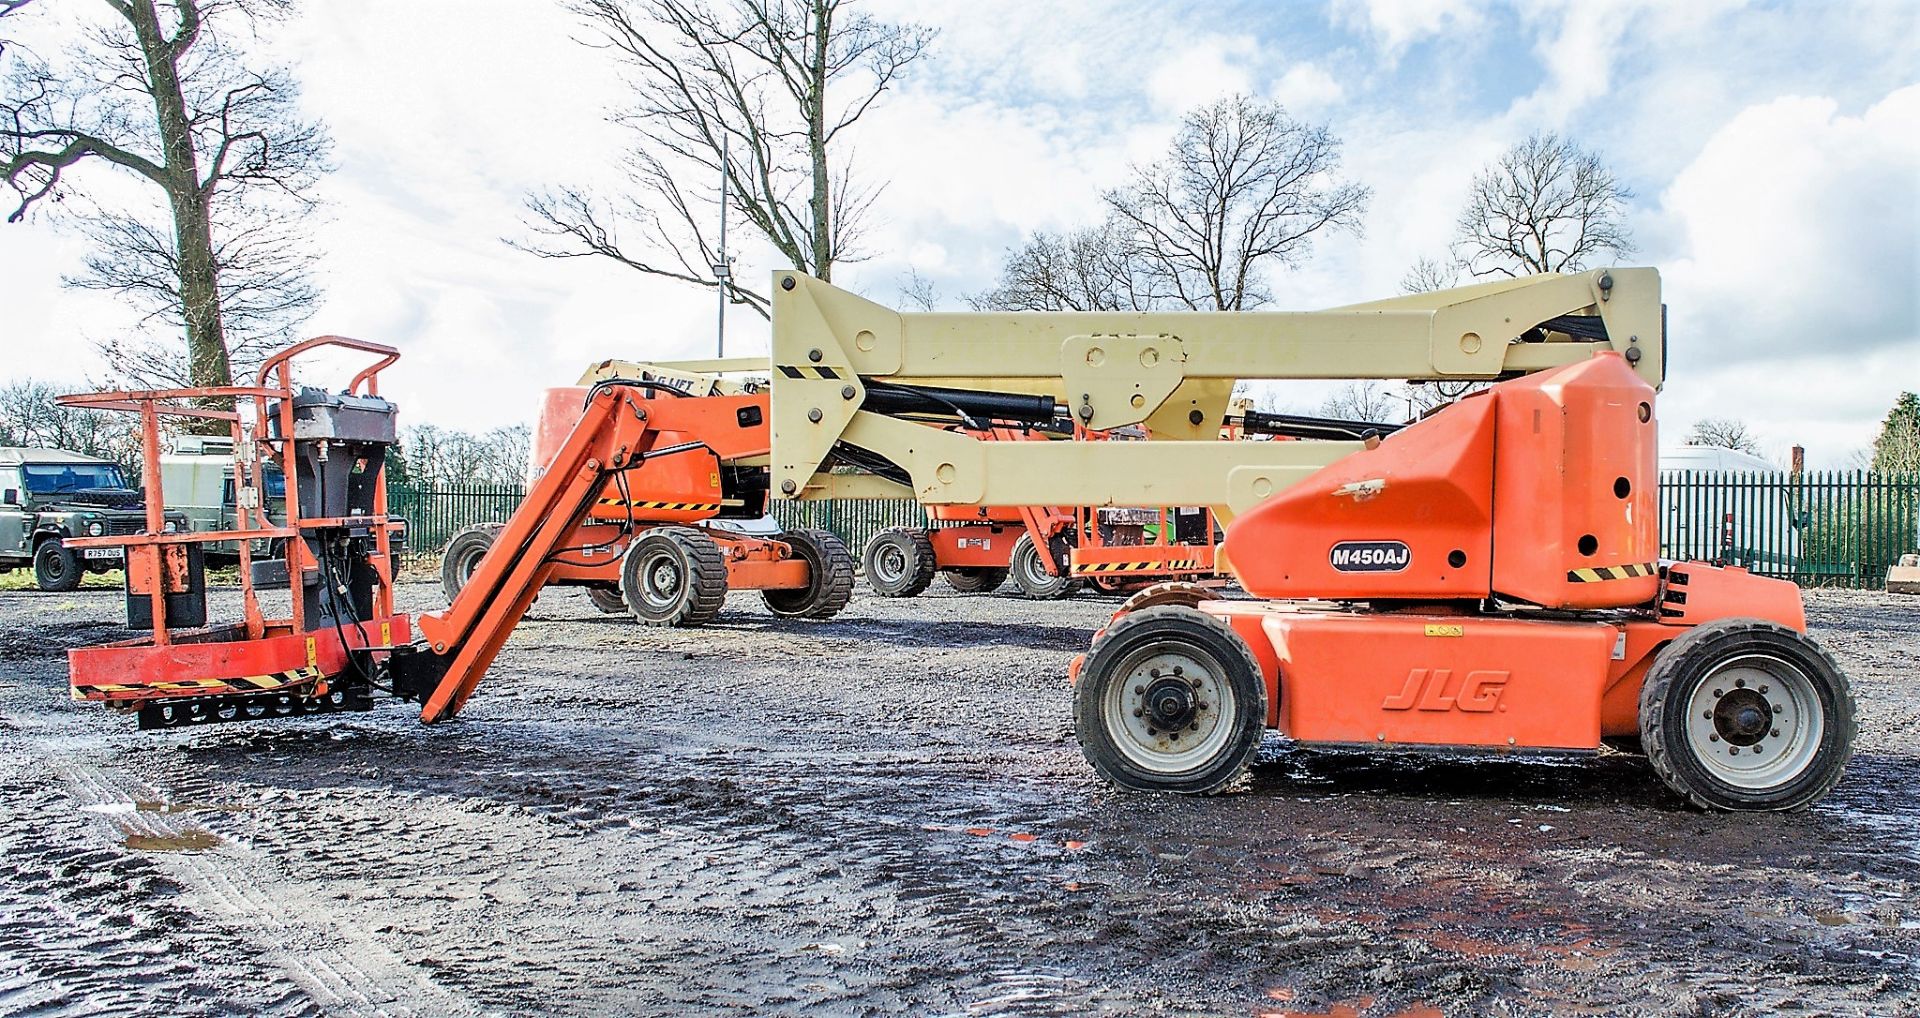 JLG M450AJ battery electric articulated boom access platform Year : 2006 S/N: 2718 c/w generator - Image 7 of 19